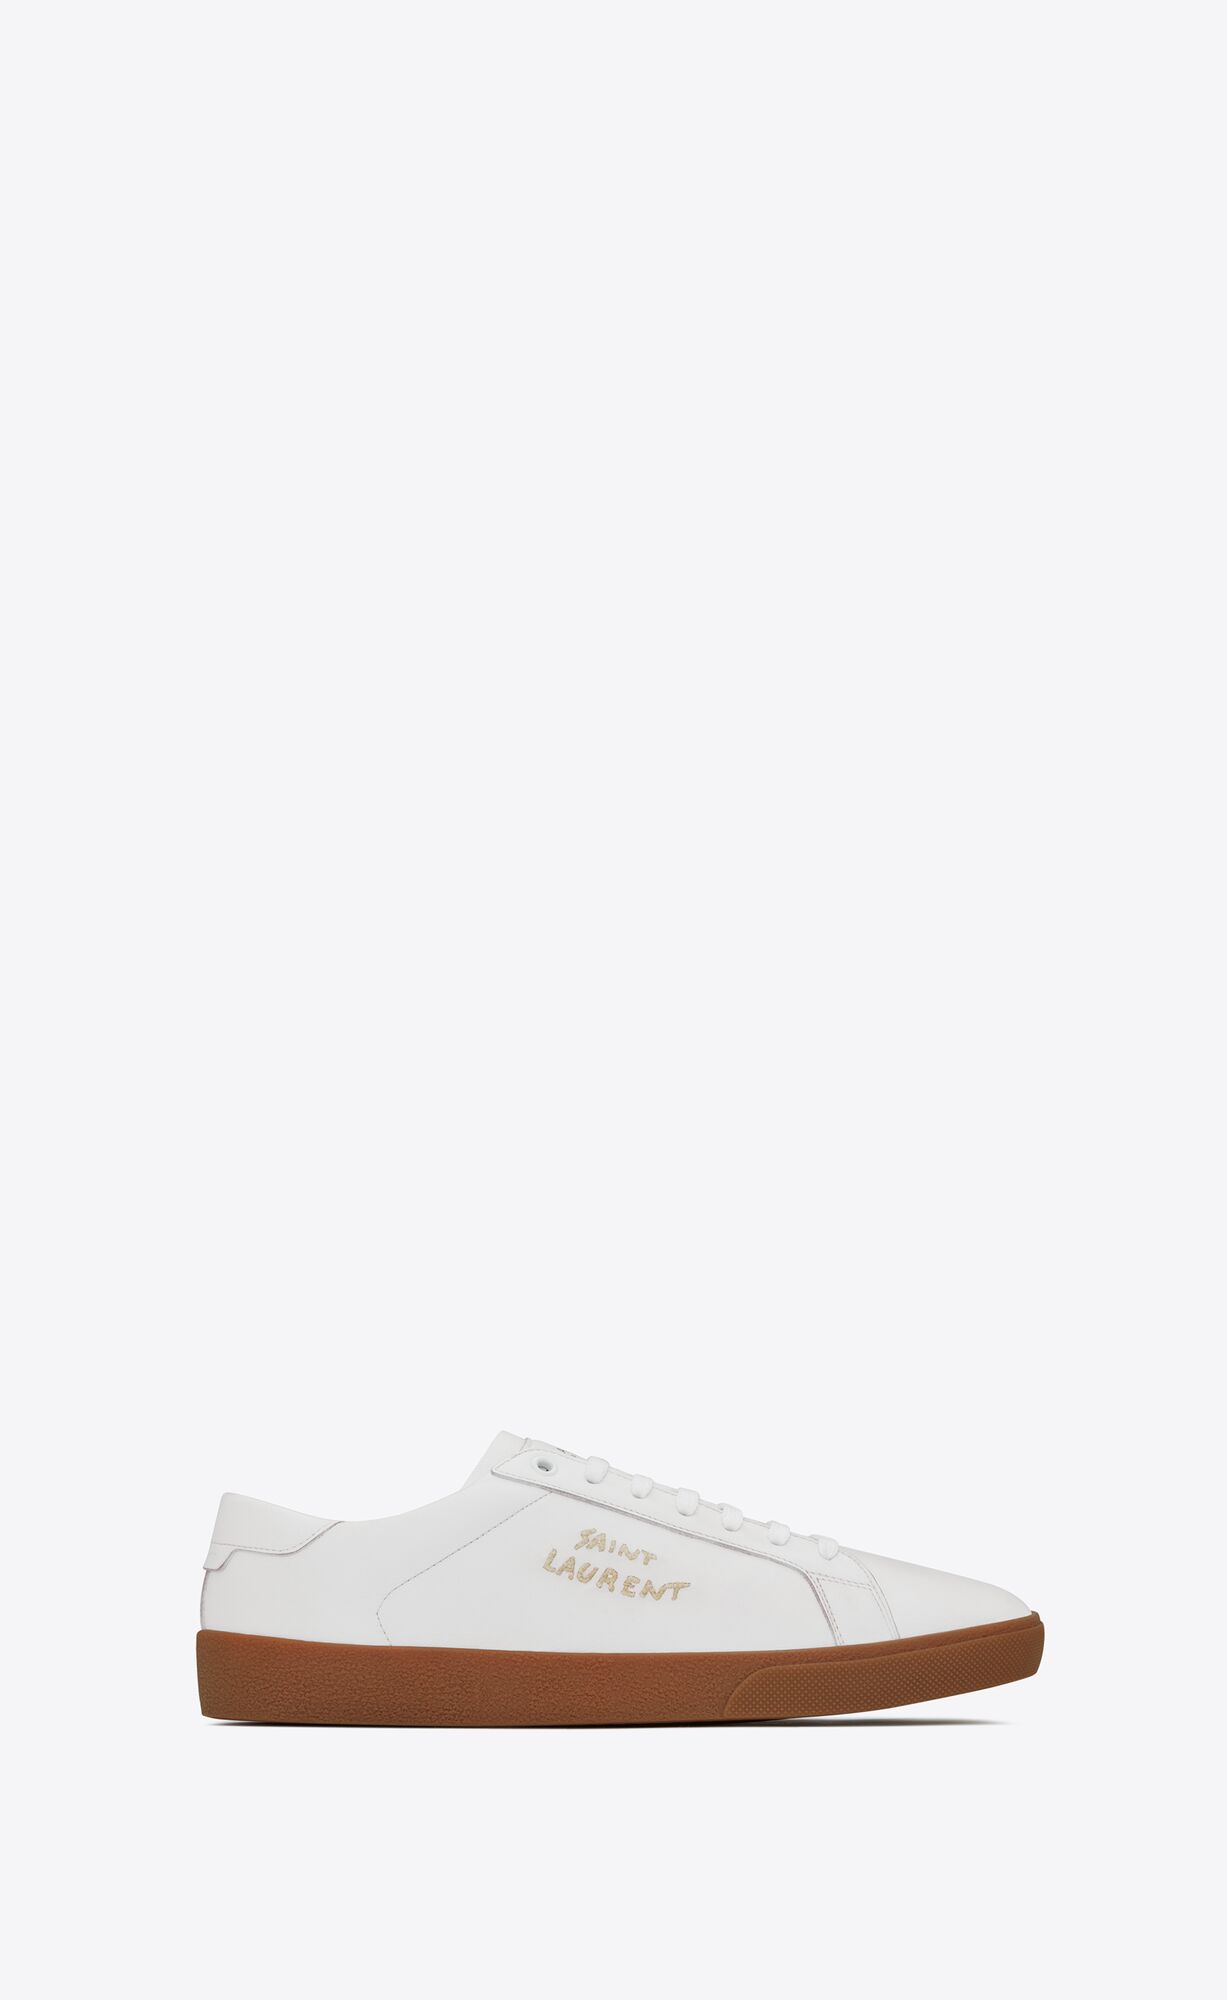 COURT CLASSIC SL/06 embroidered sneakers in canvas and smooth leather ...